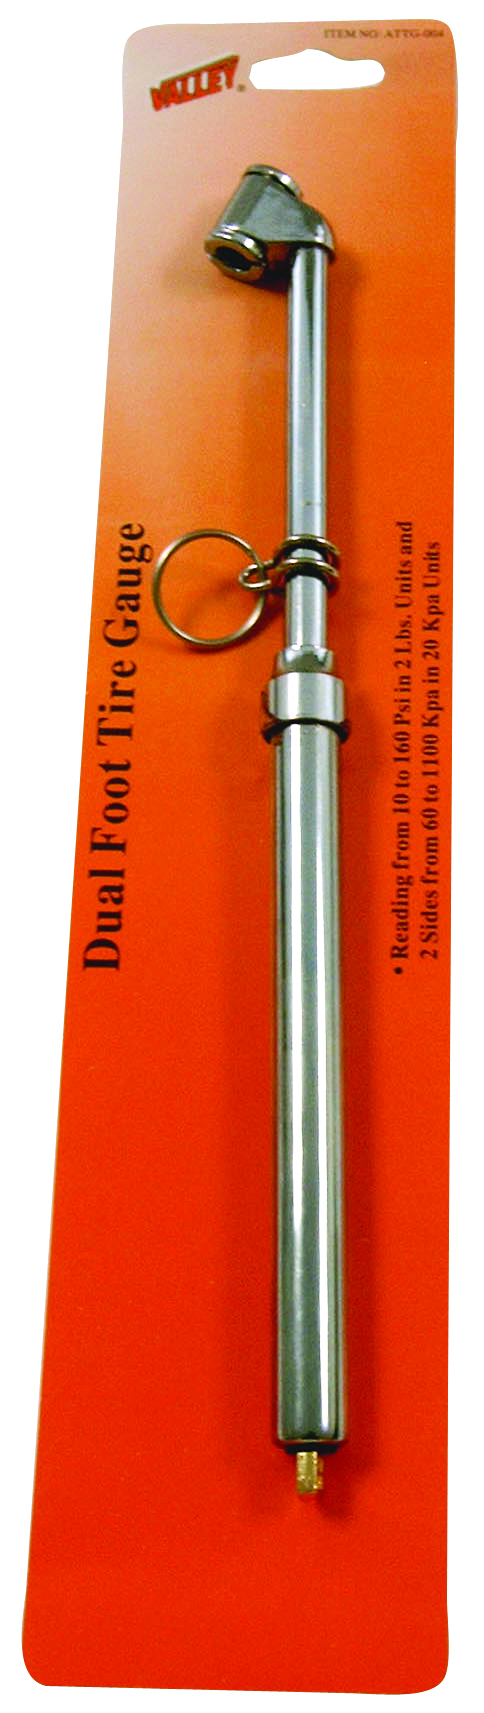 12 Air Tire Gauge with Dual Head For Truck Tires